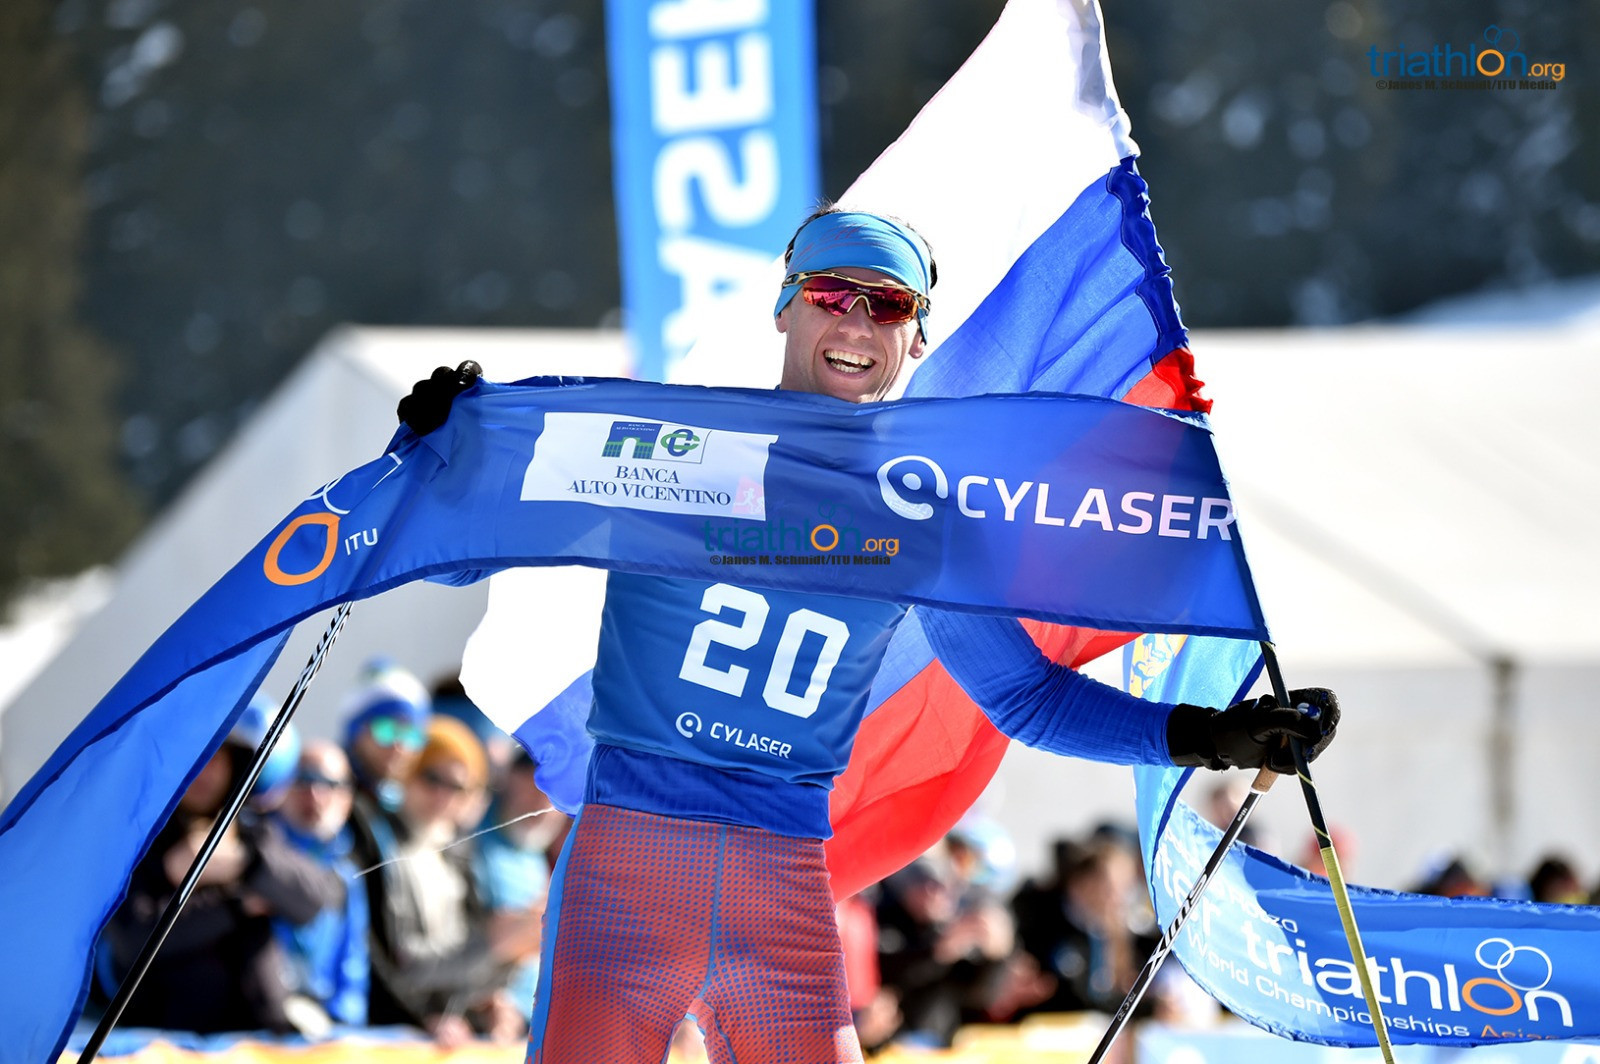 Pavel Andreev continued his domination of the men's event ©World Triathlon